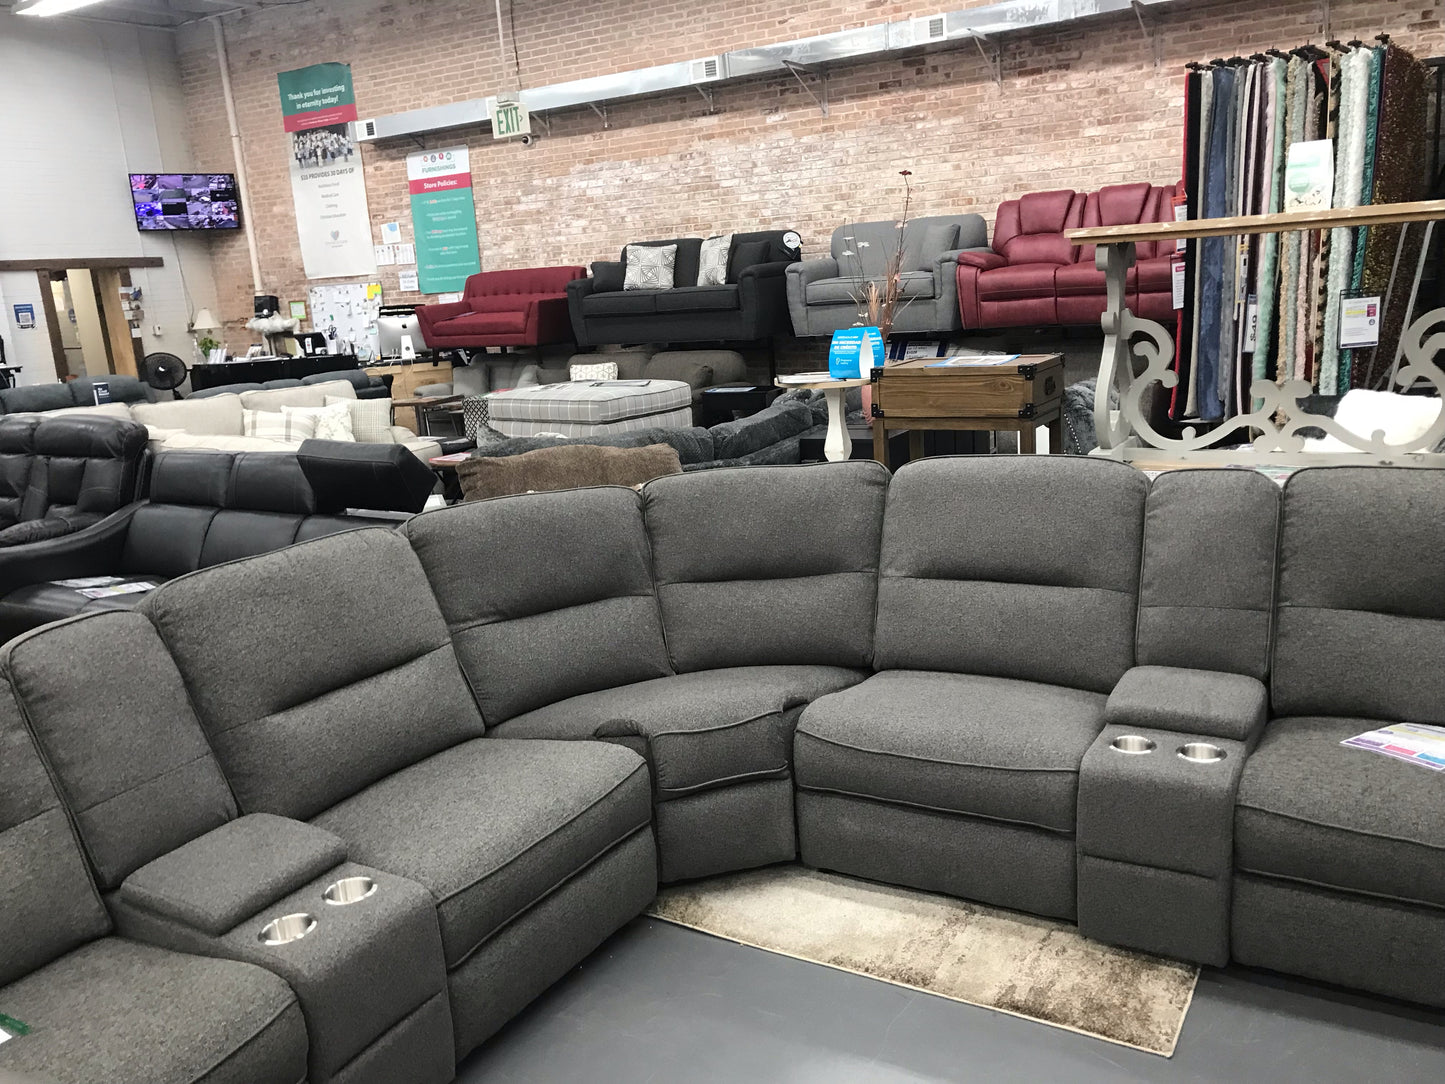 WEEKLY or MONTHLY. Albert Couch and Loveseat